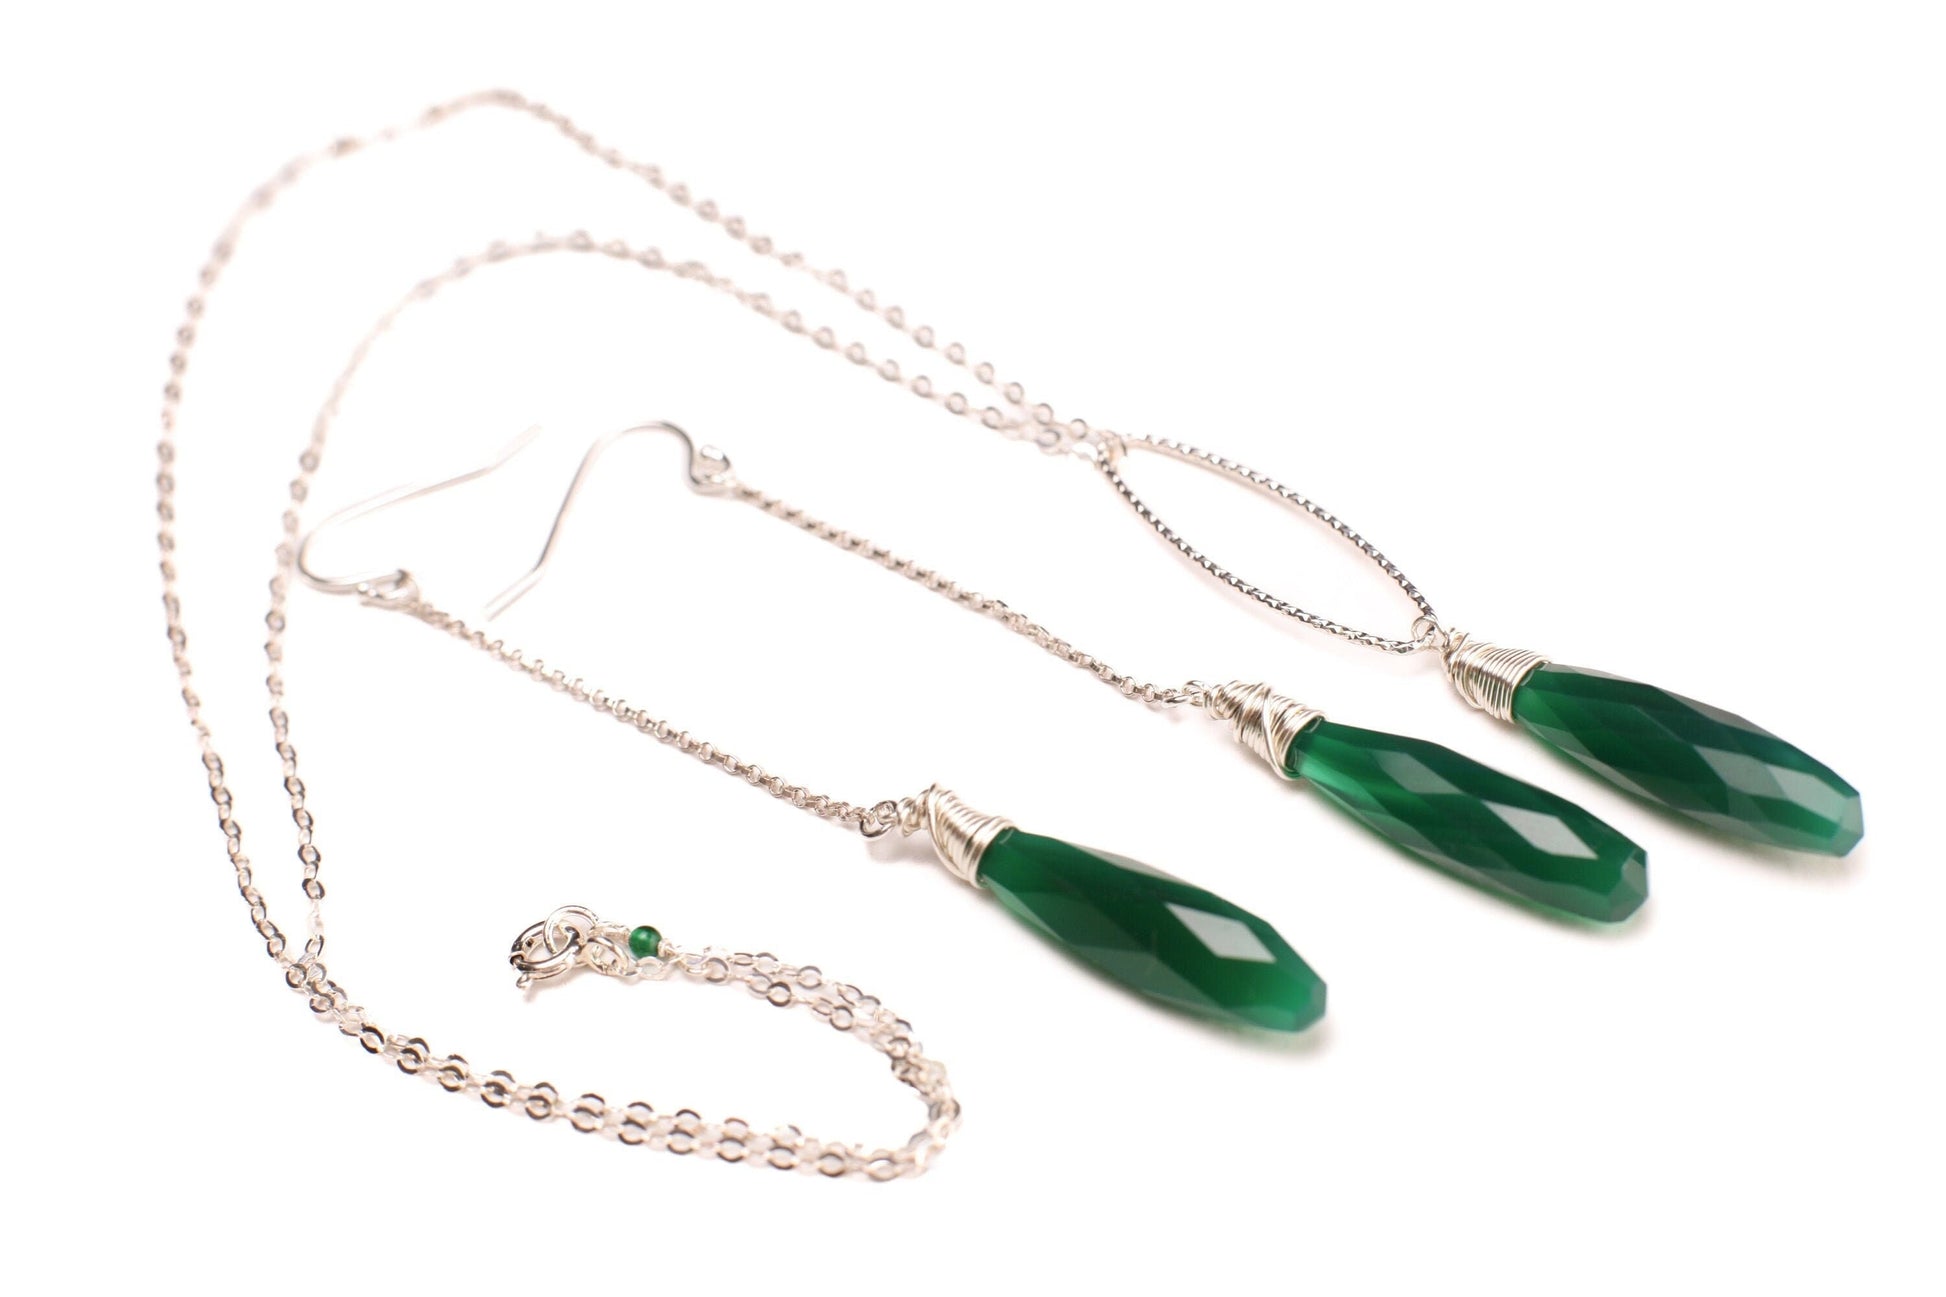 Genuine Green Onyx 7x30mm Wire Wrapped Briolette Teardrop Necklace, Matching Dangling Long Earring in 925 Sterling Silver, Gift for her